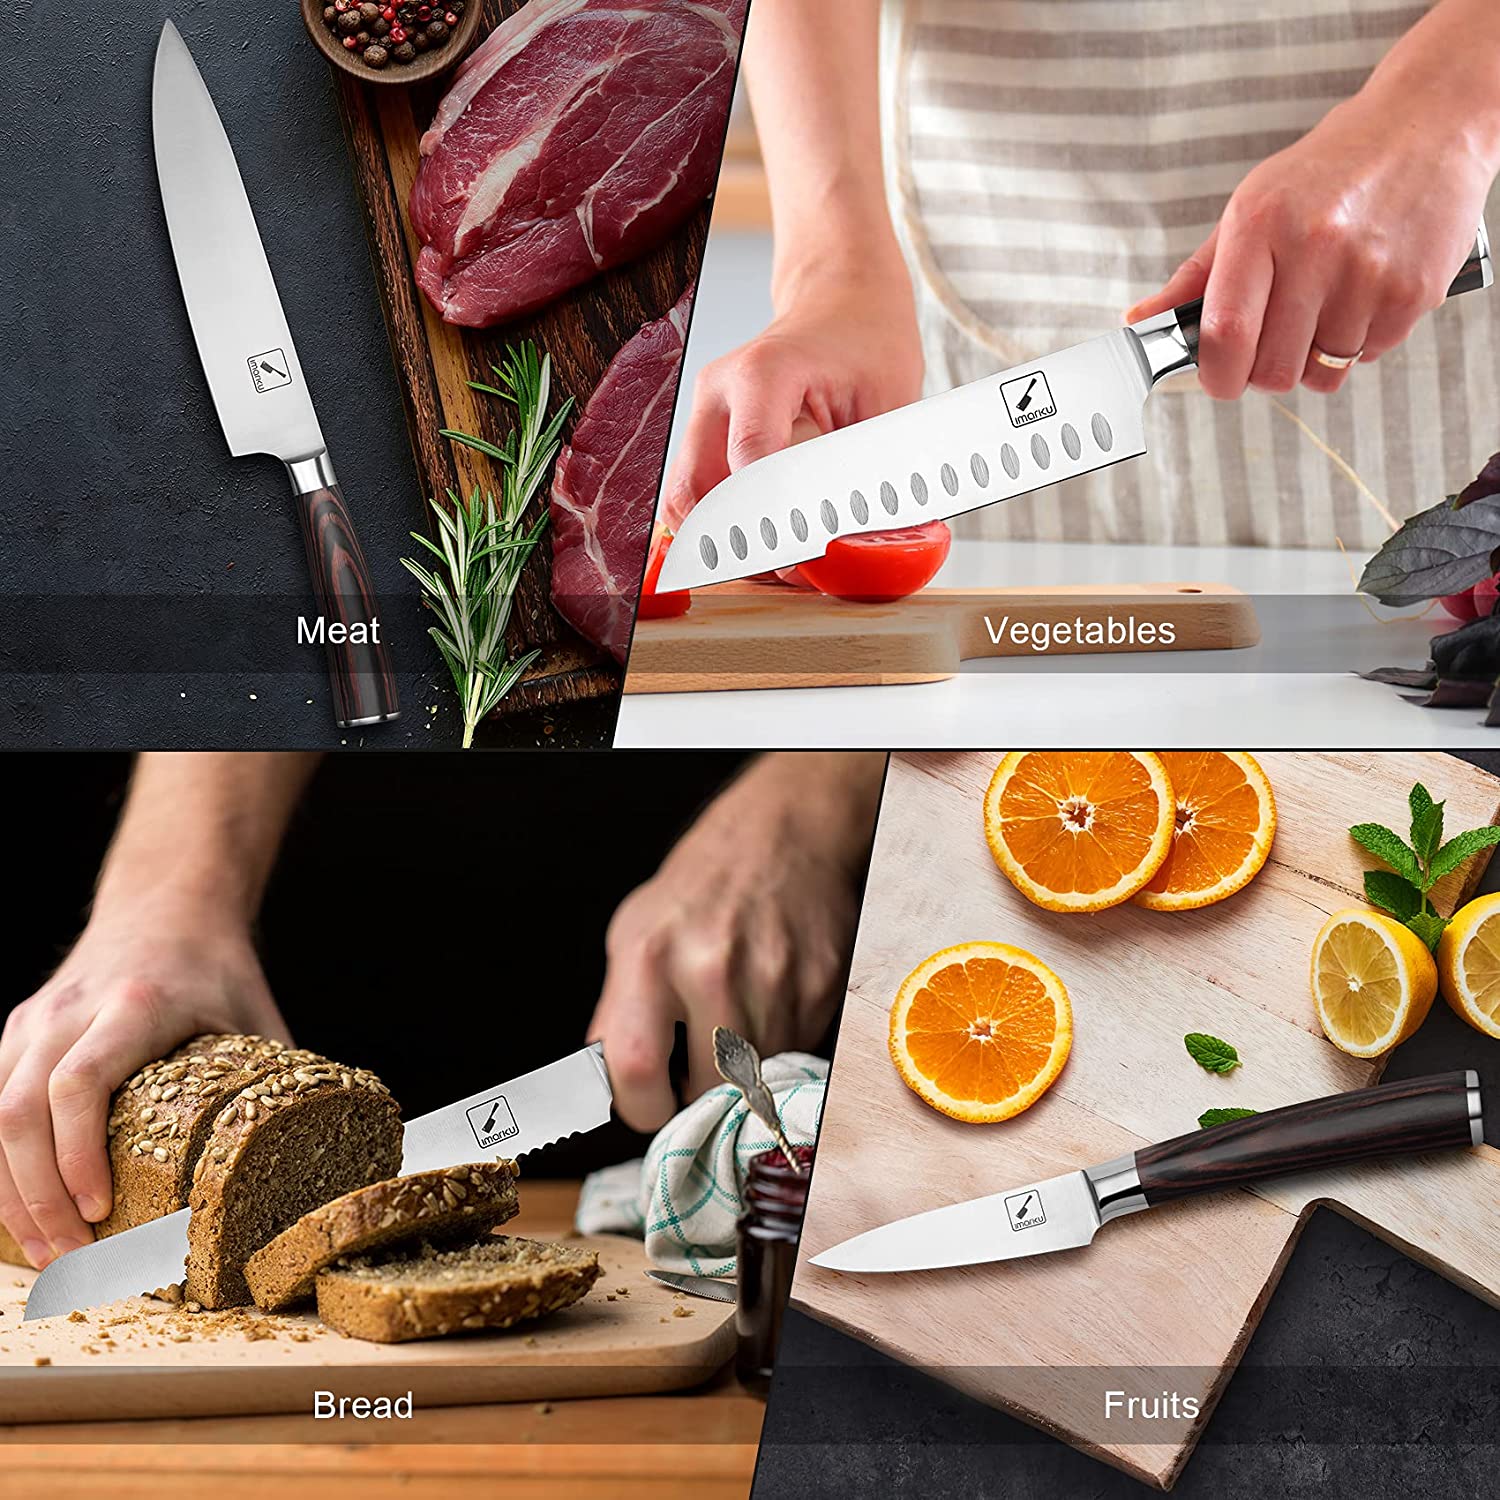 Kitchen Knives & Knife Blocks Buying Guide